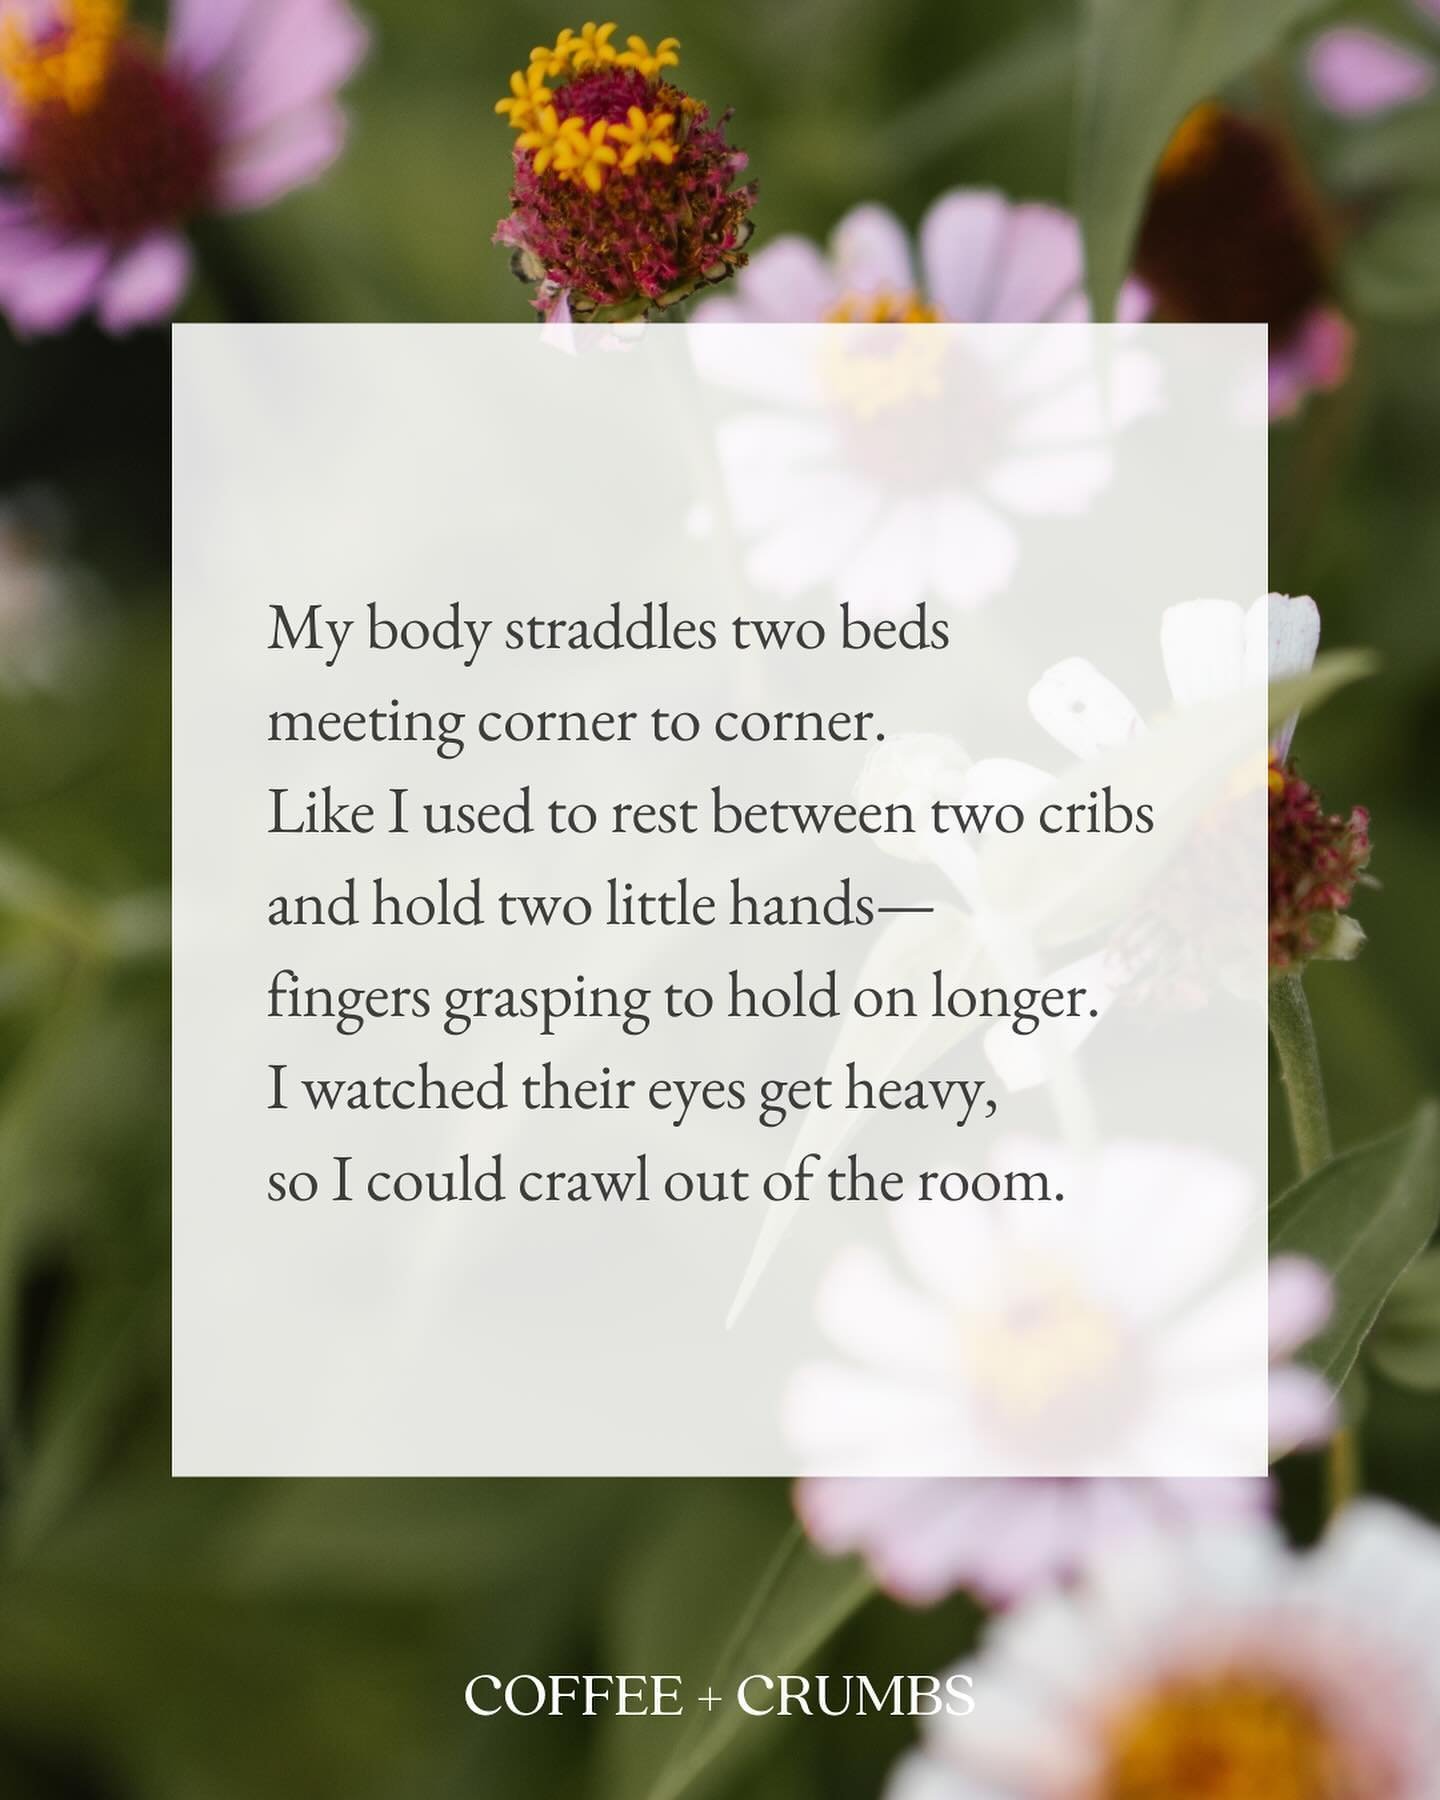 My body straddles two beds
meeting corner to corner.
Like I used to rest between two cribs
and hold two little hands&mdash;
fingers grasping to hold on longer.
I watched their eyes get heavy,
so I could crawl out of the room.

Now, I adjust my body t